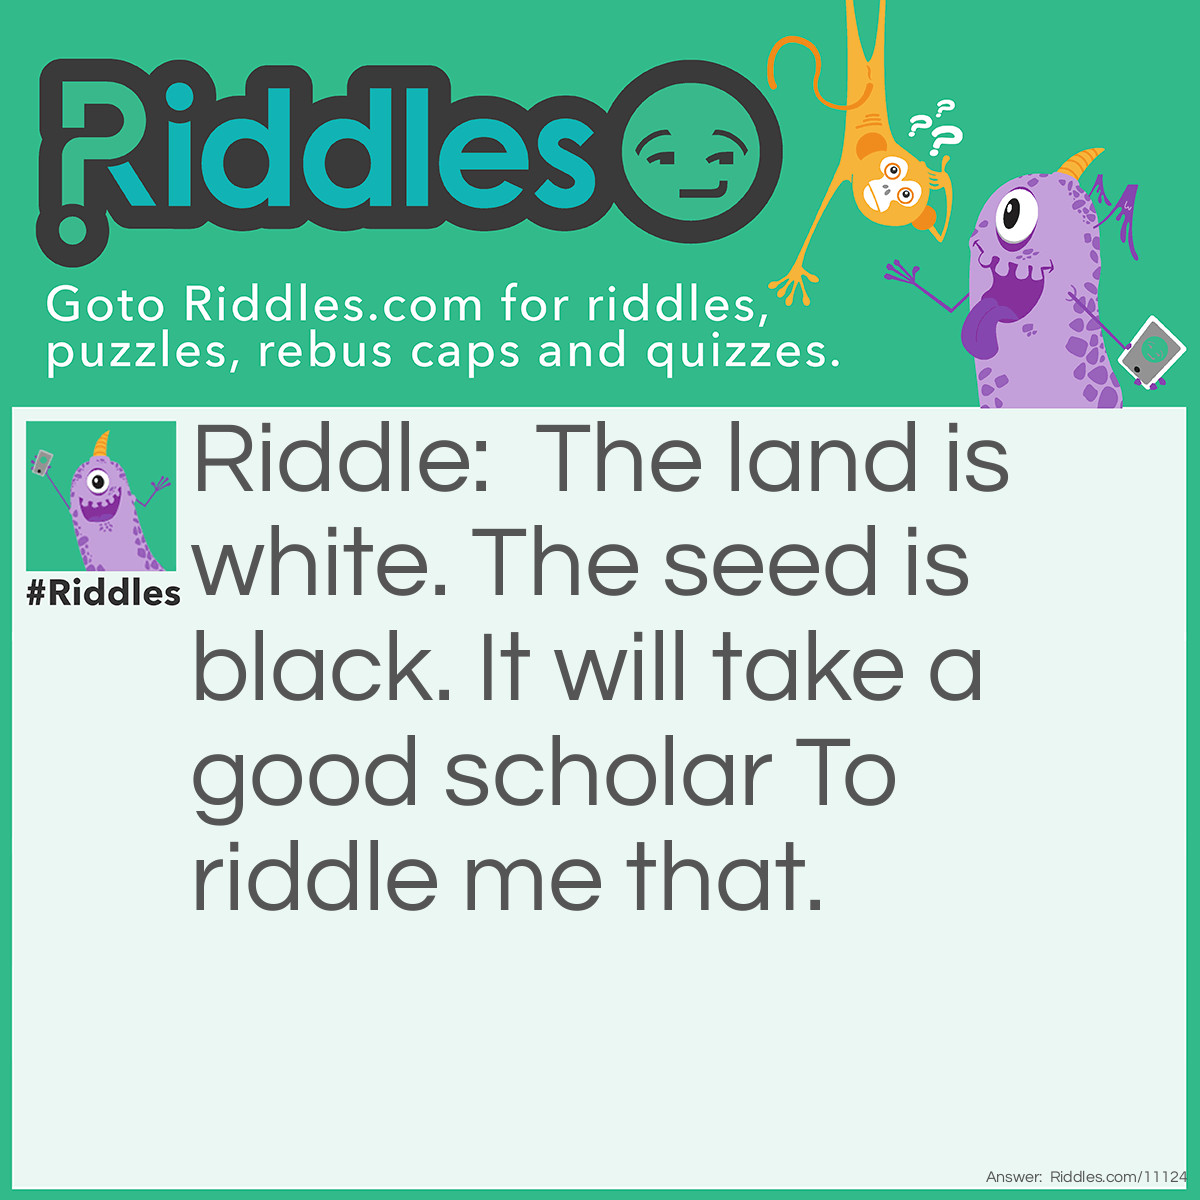 Riddle: The land is white. The seed is black. It will take a good scholar To riddle me that. Answer: A book.